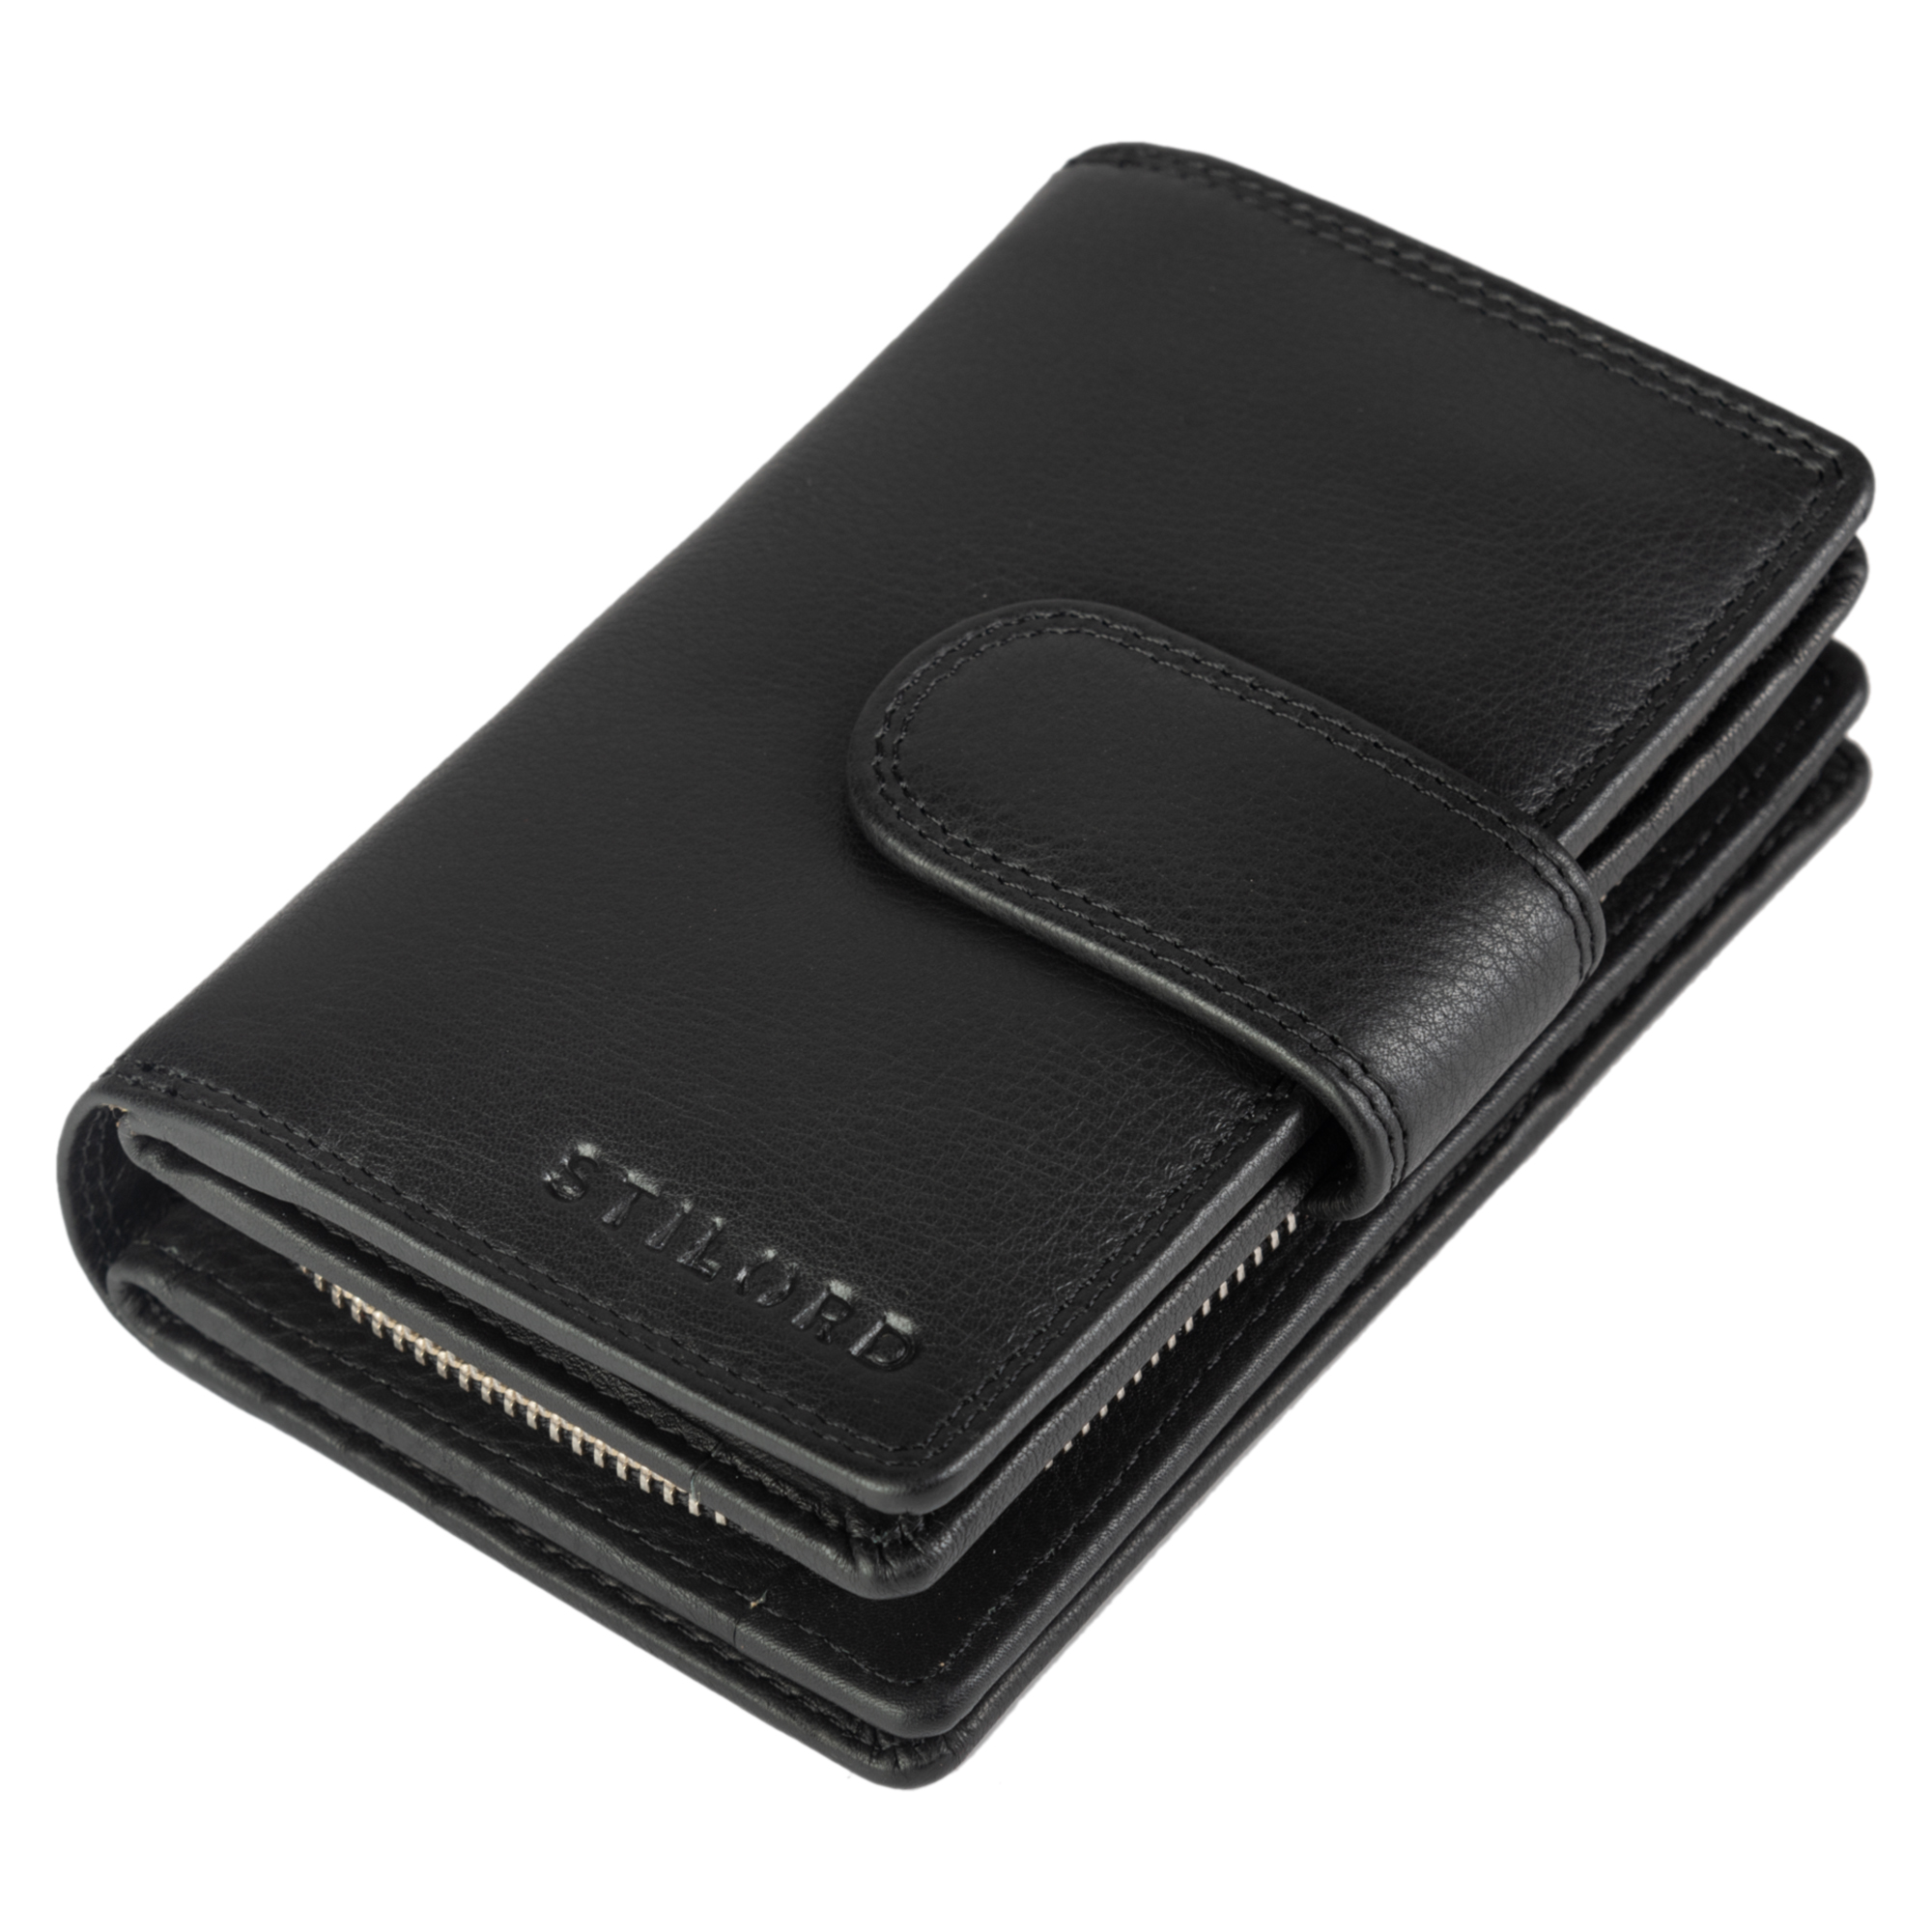 Mens 4 Fold Wallet | 20 Card Slots | Wallet with Coin Purse | Press Stud Clasp Closure | Cards Organiser | Cowhide Leather Gents Wallet